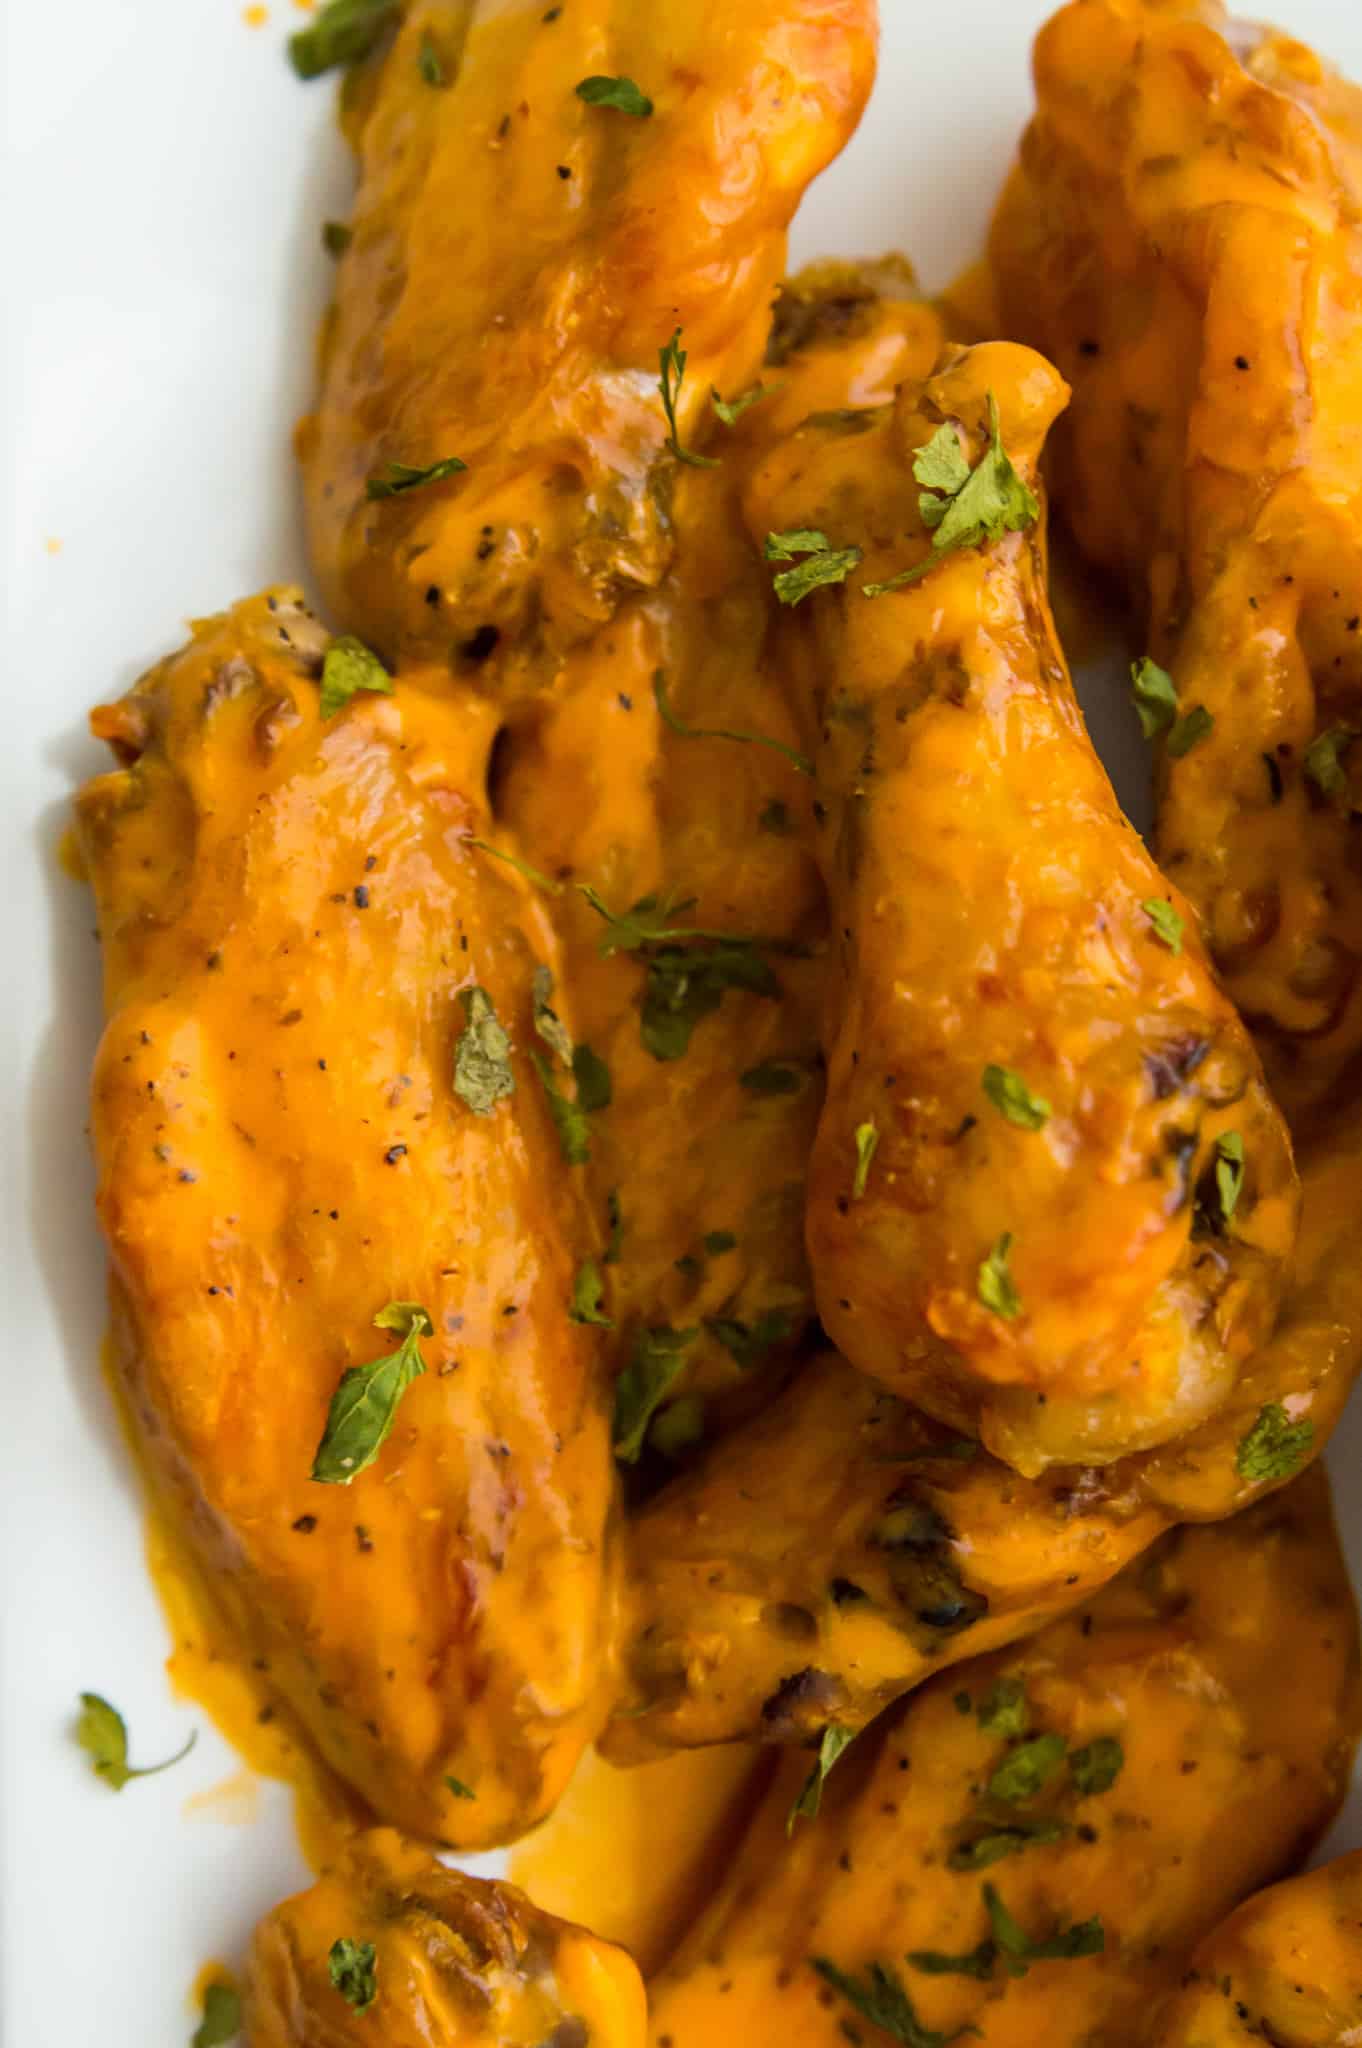 A plate full of cooked chicken wings covered in buffalo sauce and garnished with parsley.